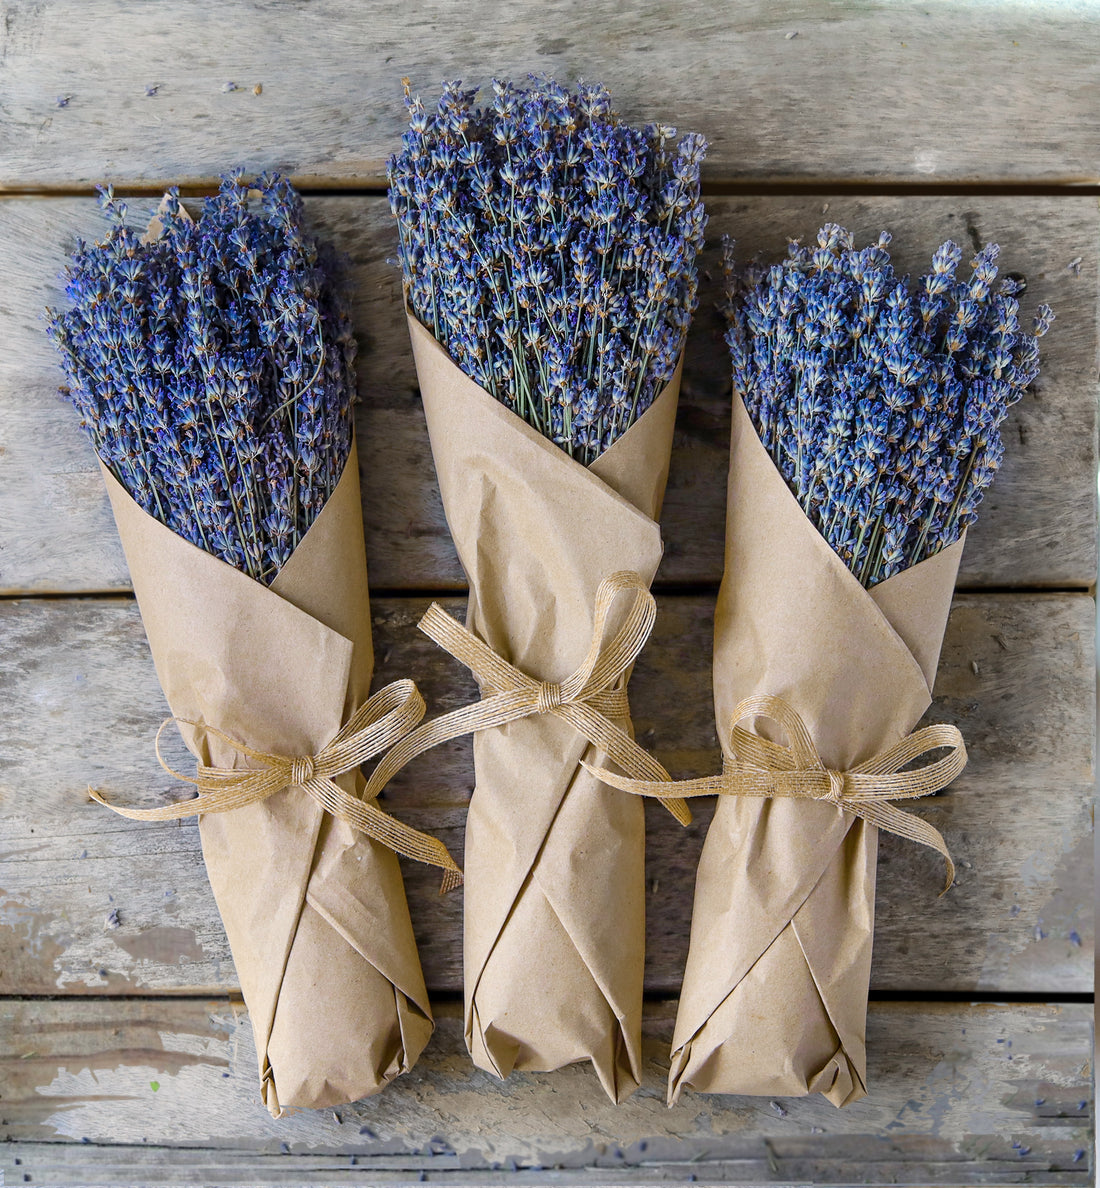 Emmalinebride | WHERE TO BUY DRIED LAVENDER BOUQUETS? — ASK EMMALINE